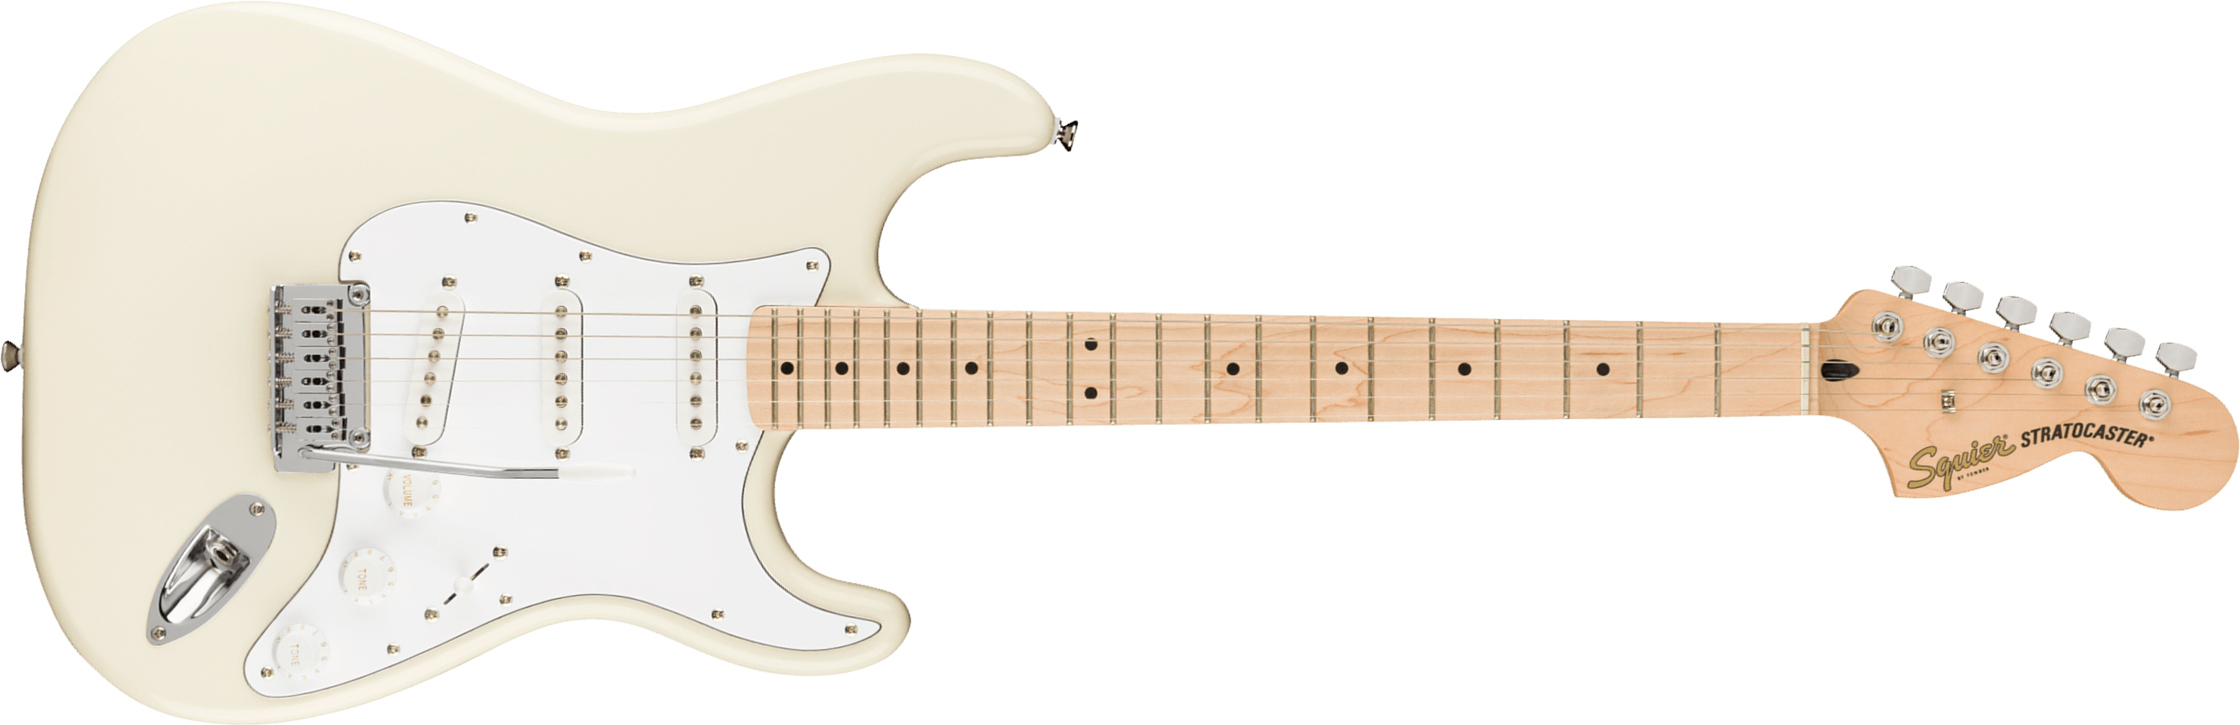 Squier Strat Affinity 2021 Sss Trem Mn - Olympic White - Str shape electric guitar - Main picture